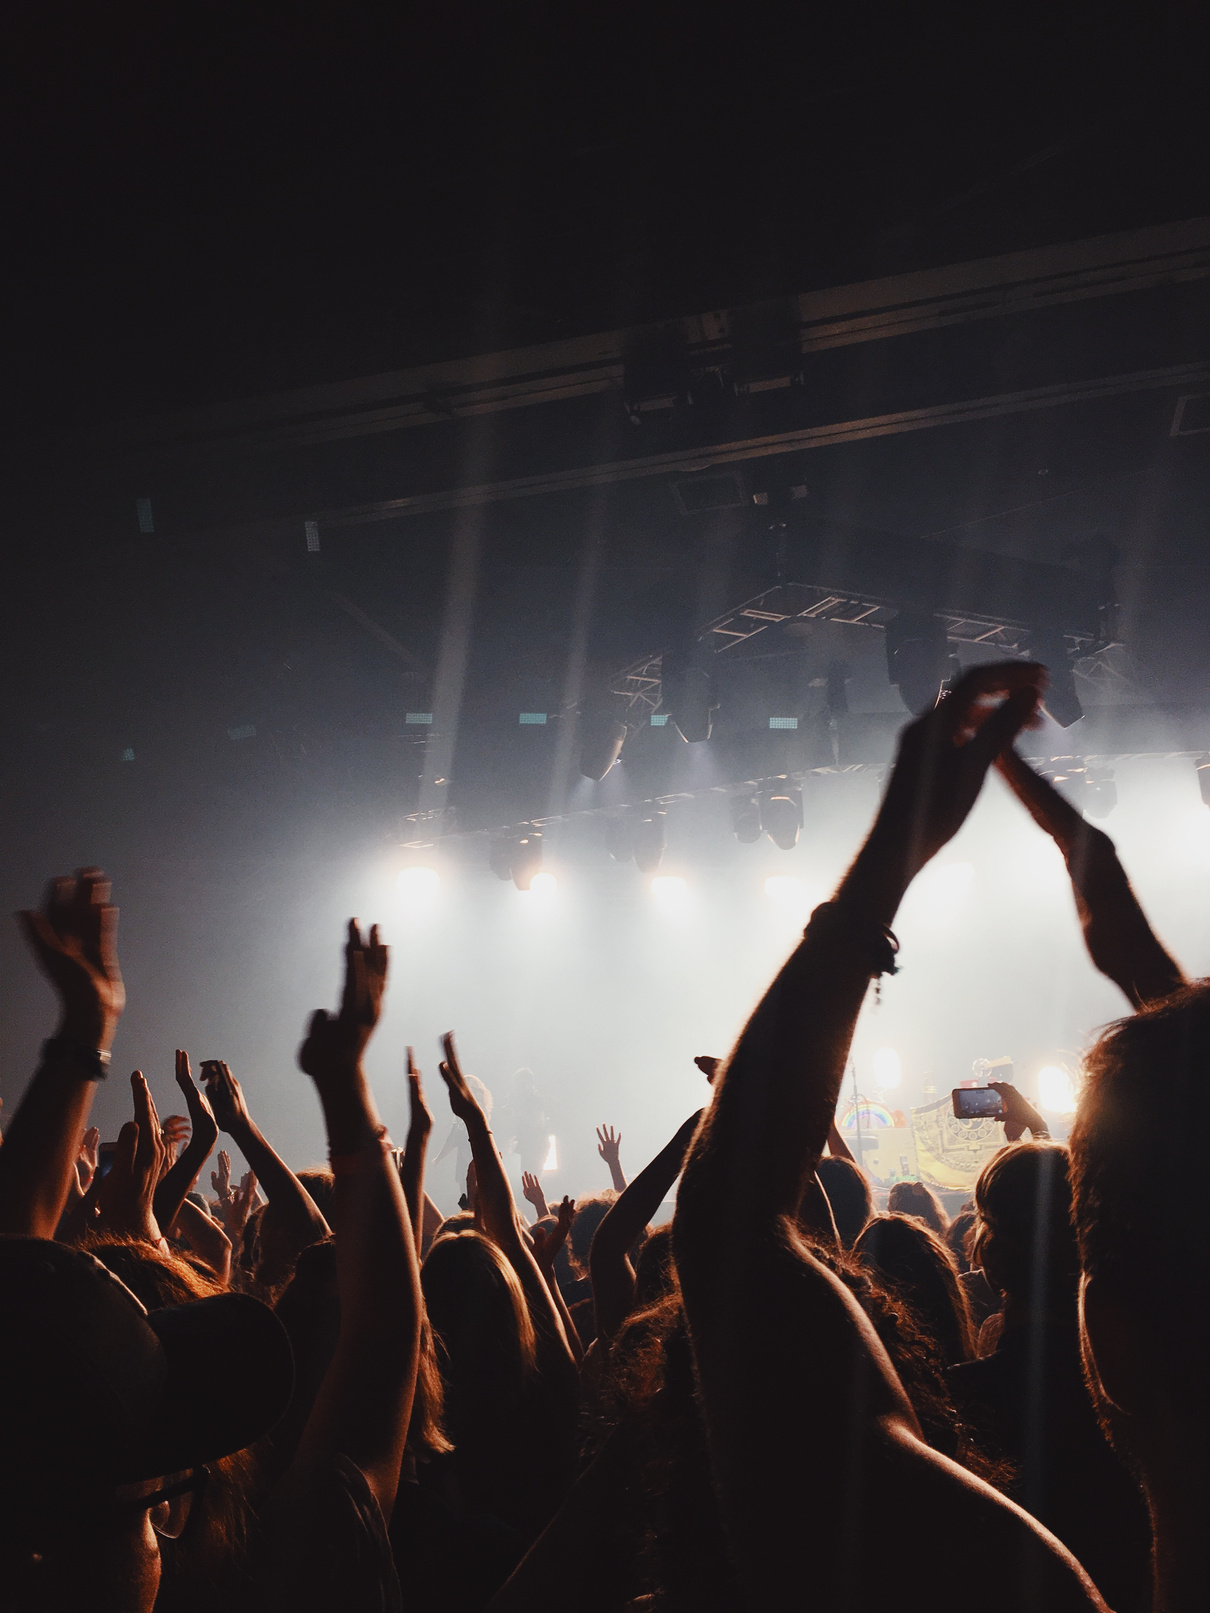 A group of people at a concert with their hands in the air